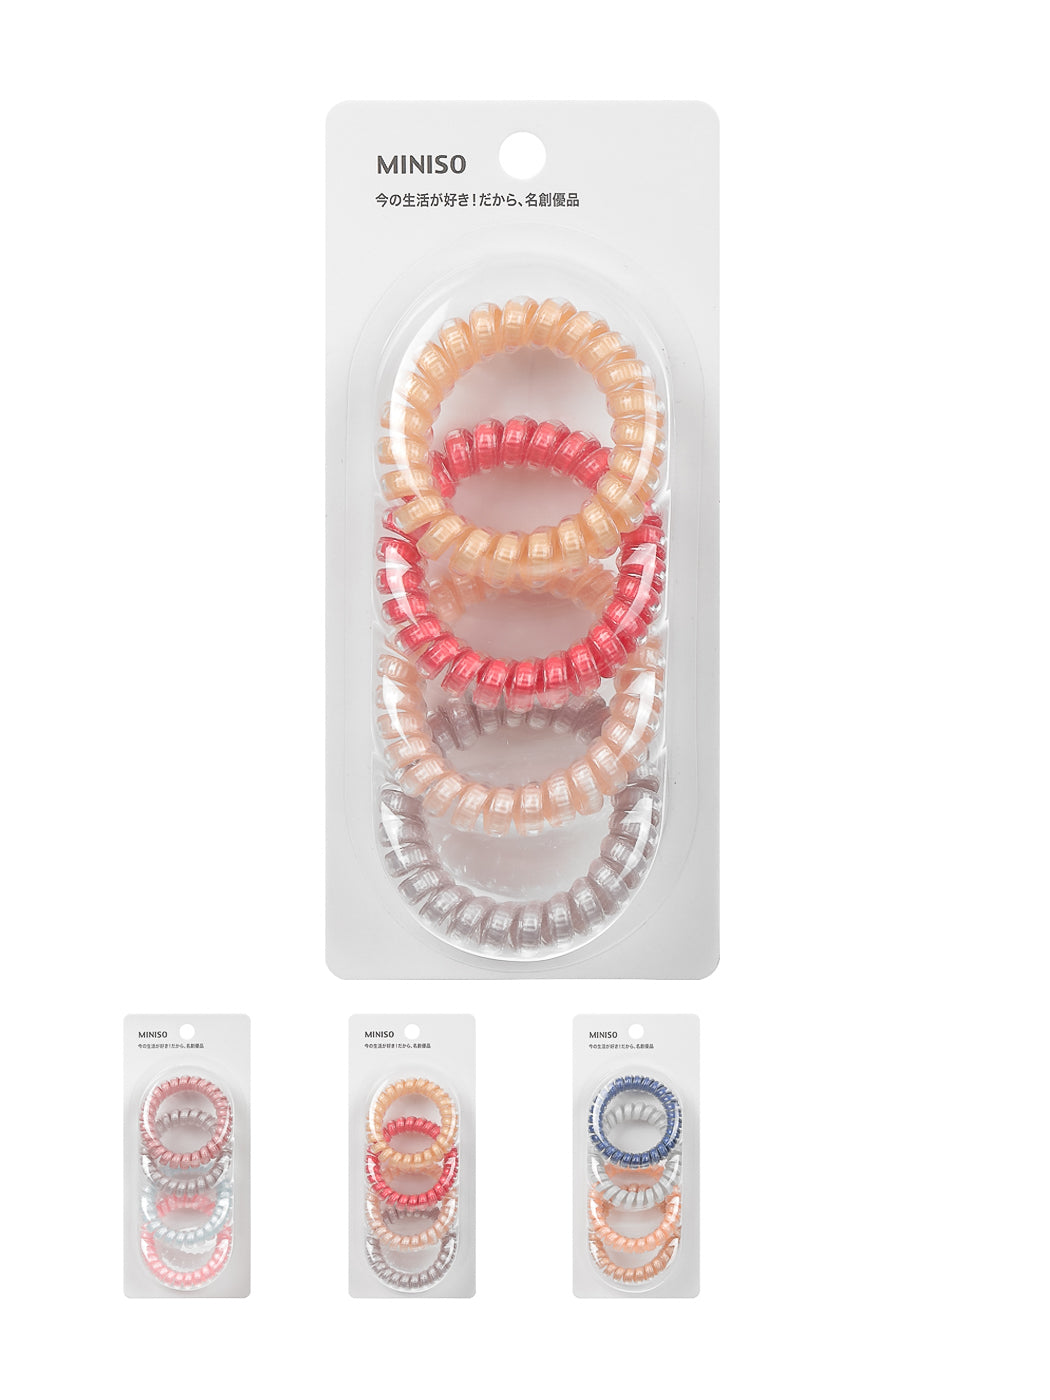 MINISO 5.0 COLORED SPIRAL HAIR TIES (4PCS) 2009806610107 HAIR TIE